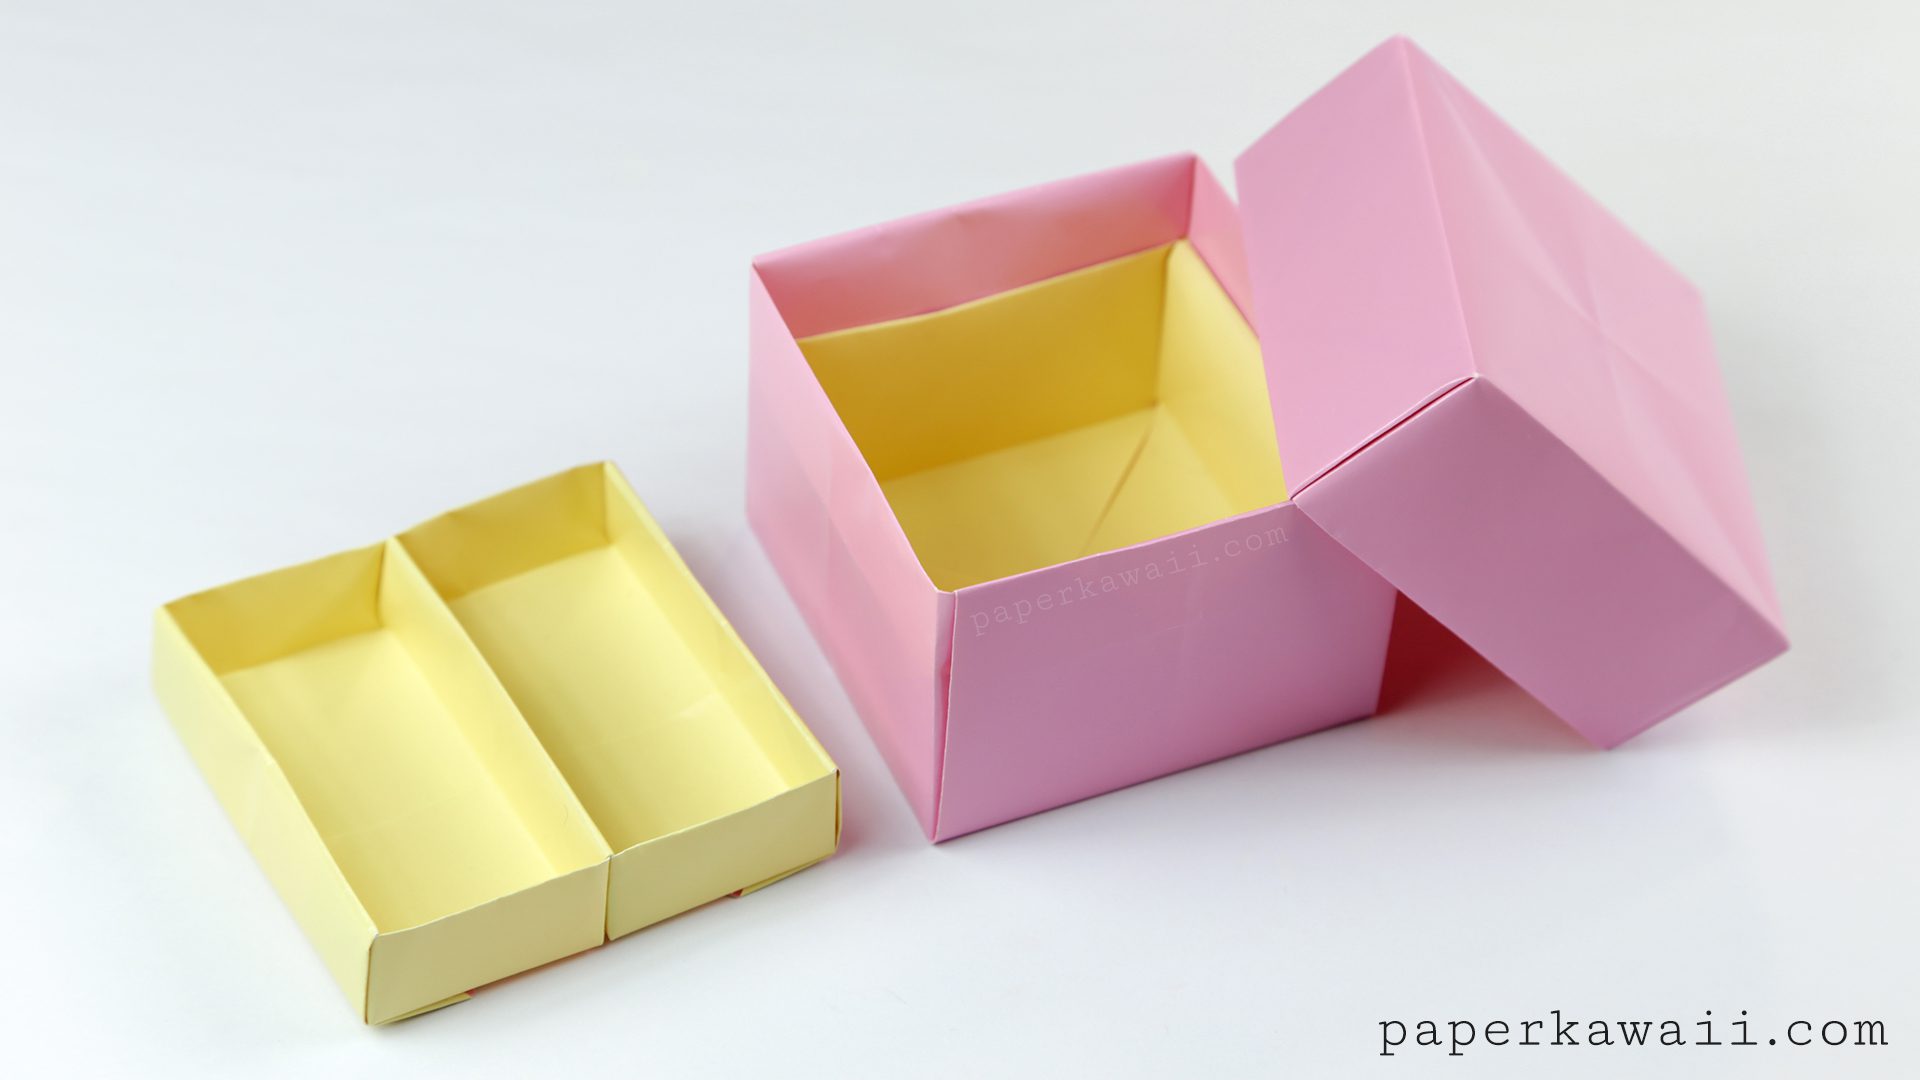 Origami 2 Tier Box Tutorial - Toolbox with Lift-out Tray - Pink and Yellow